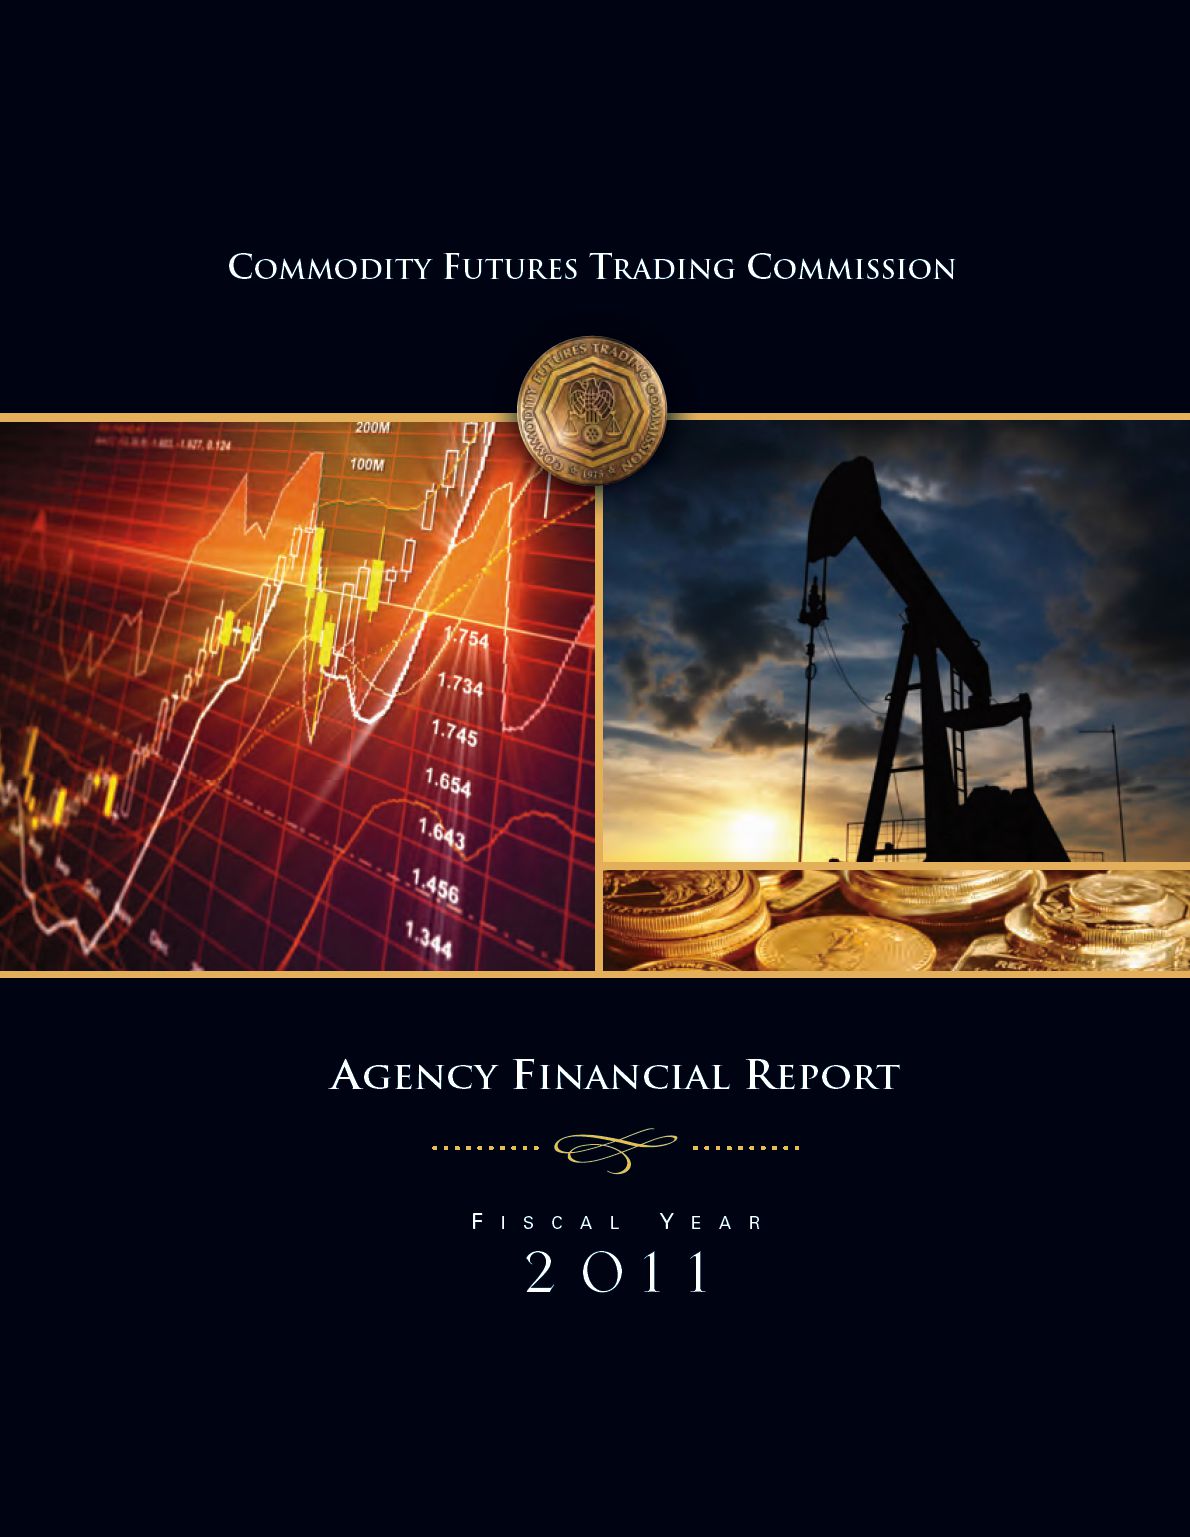 LACP 2011 Vision Awards Annual Report Competition | Commodity Futures